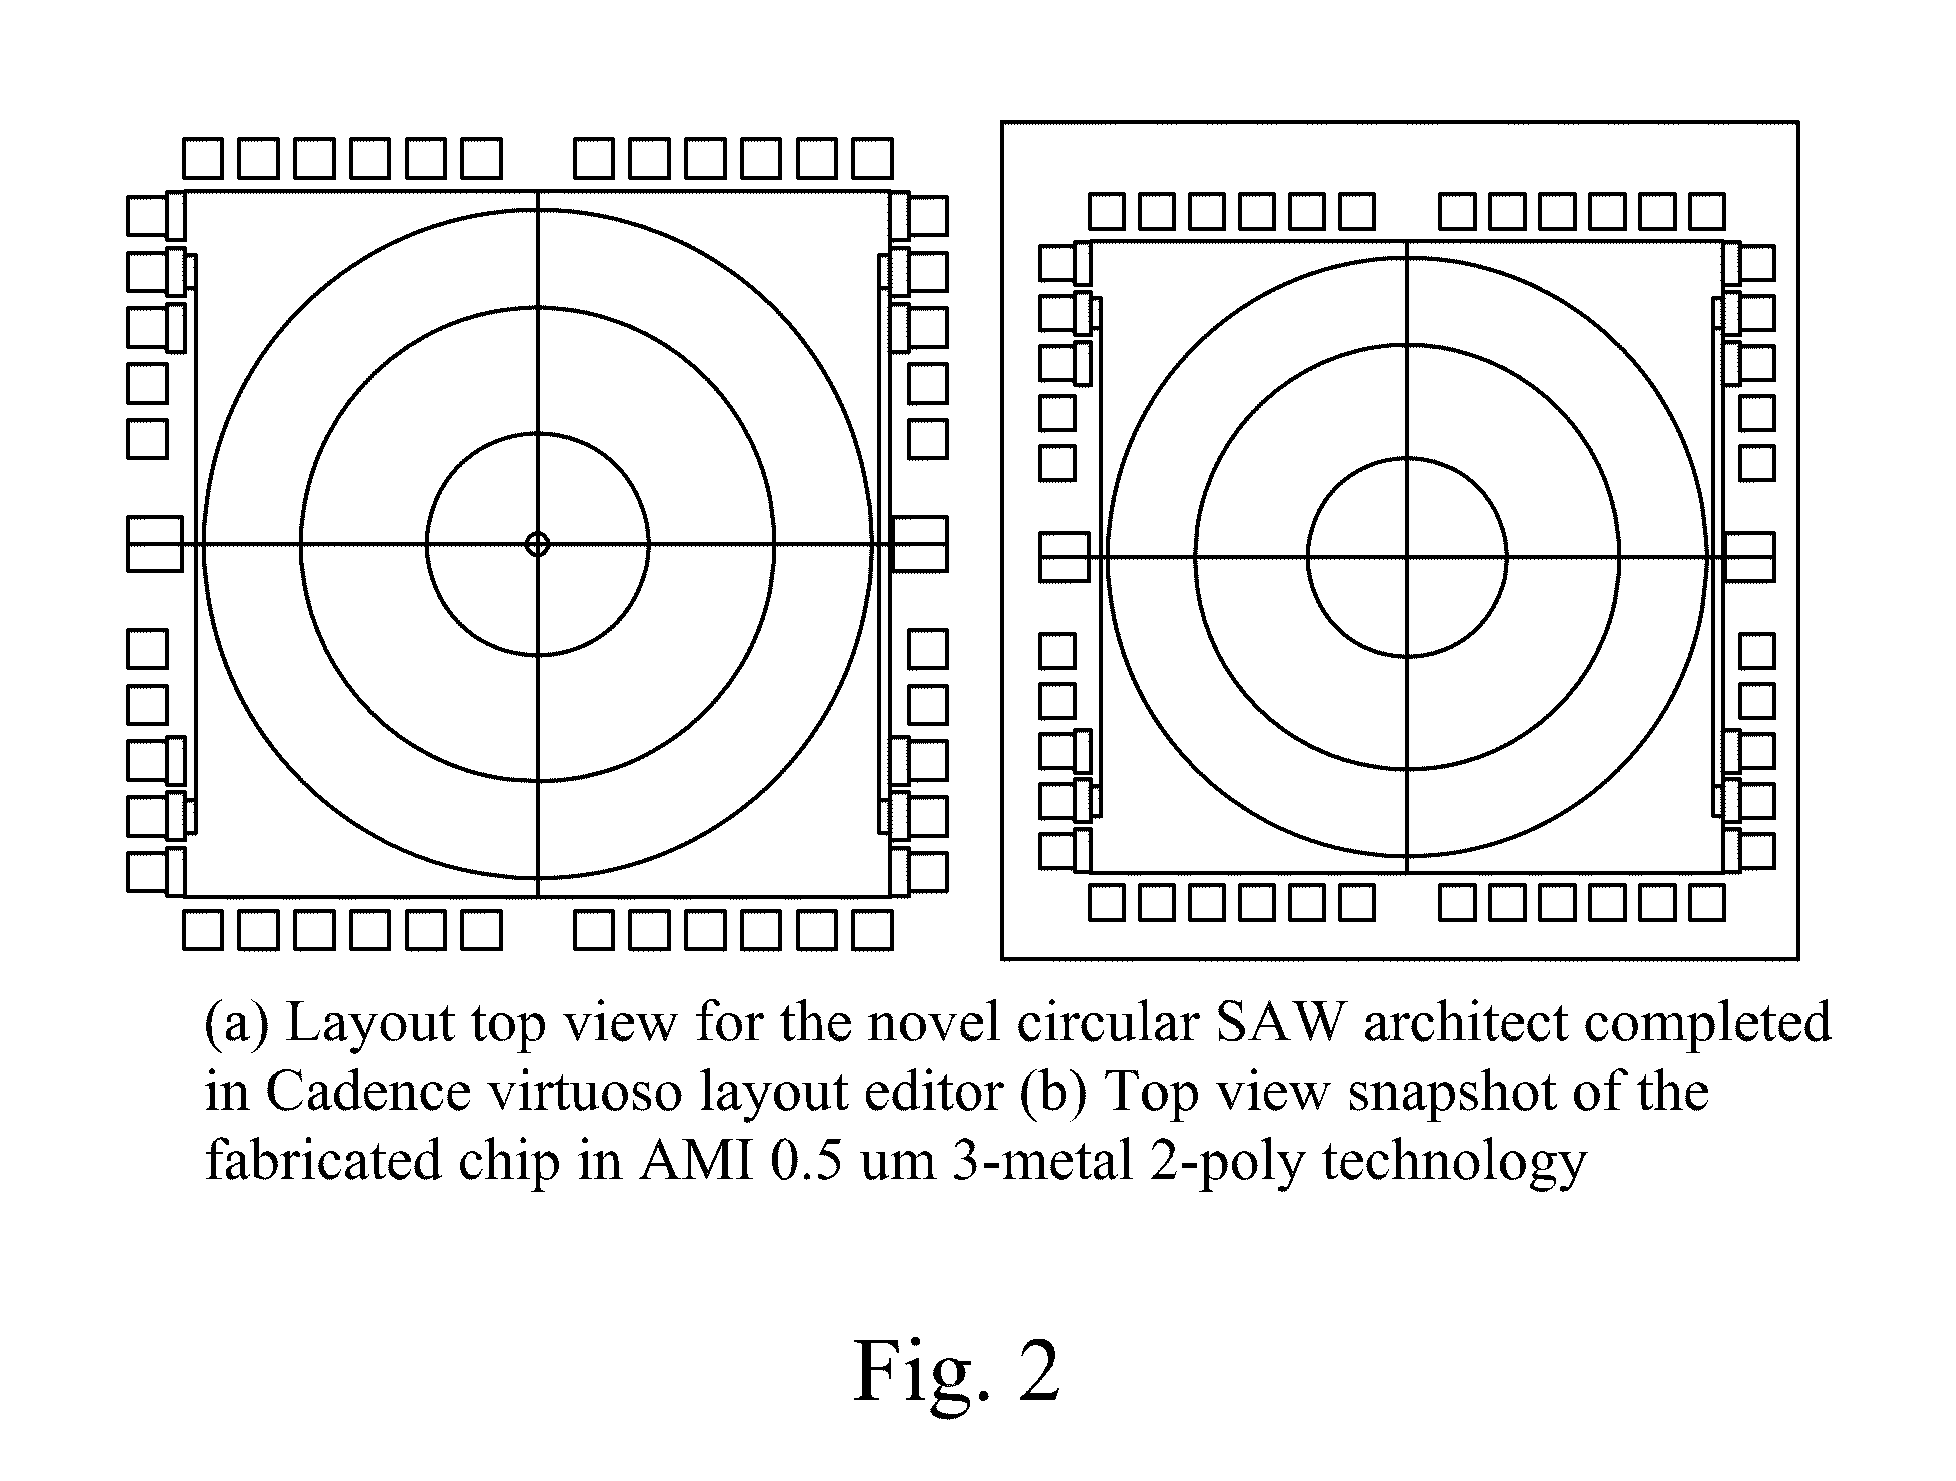 Circular surface acoustic wave (SAW) devices, processes for making them, and methods of use